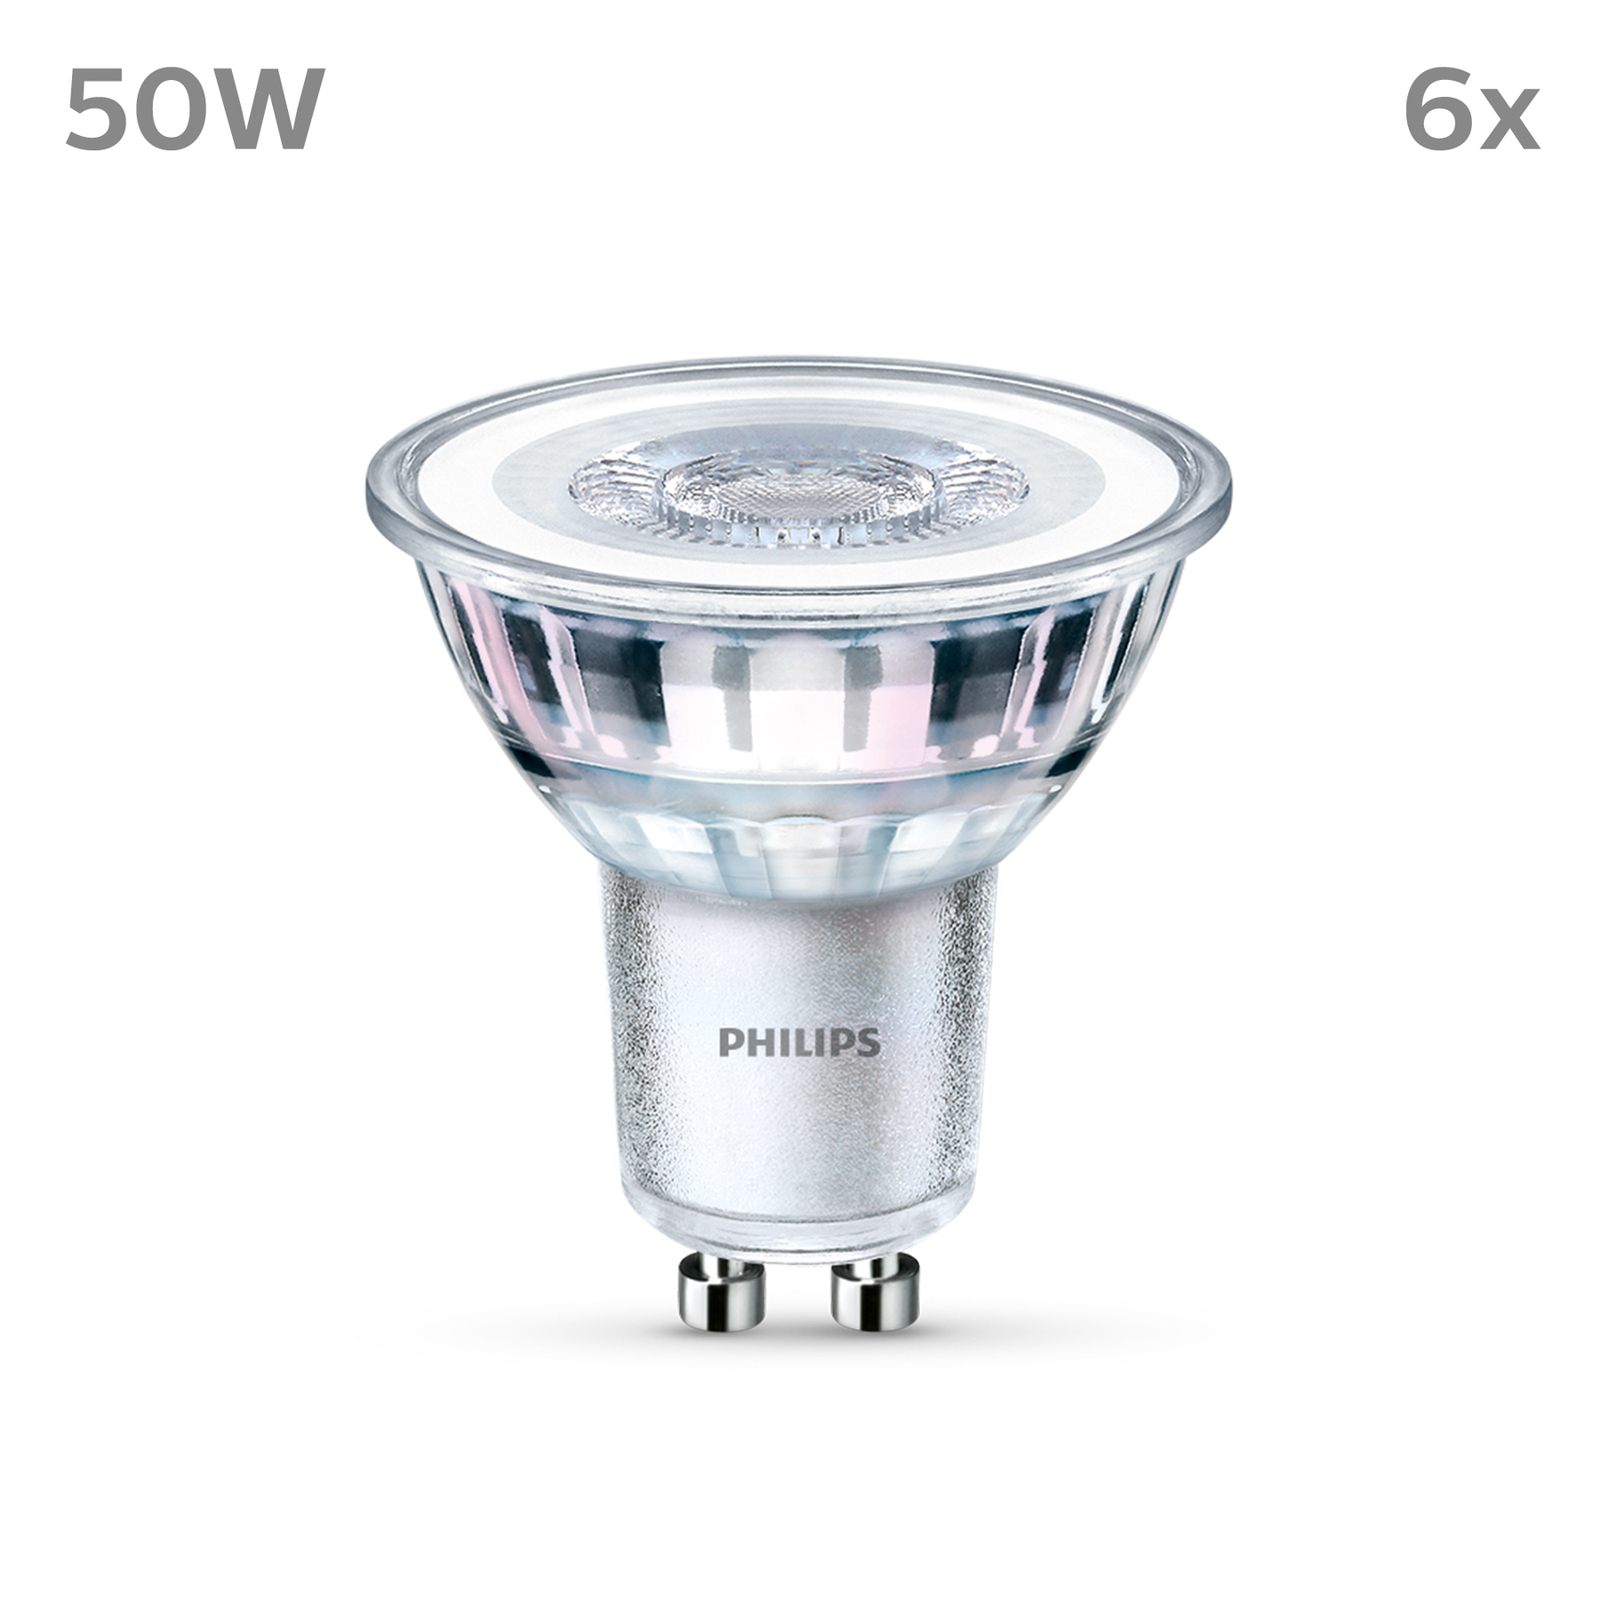 Philips LED GU10 4,6 W 355lm 827 claire 36° x6